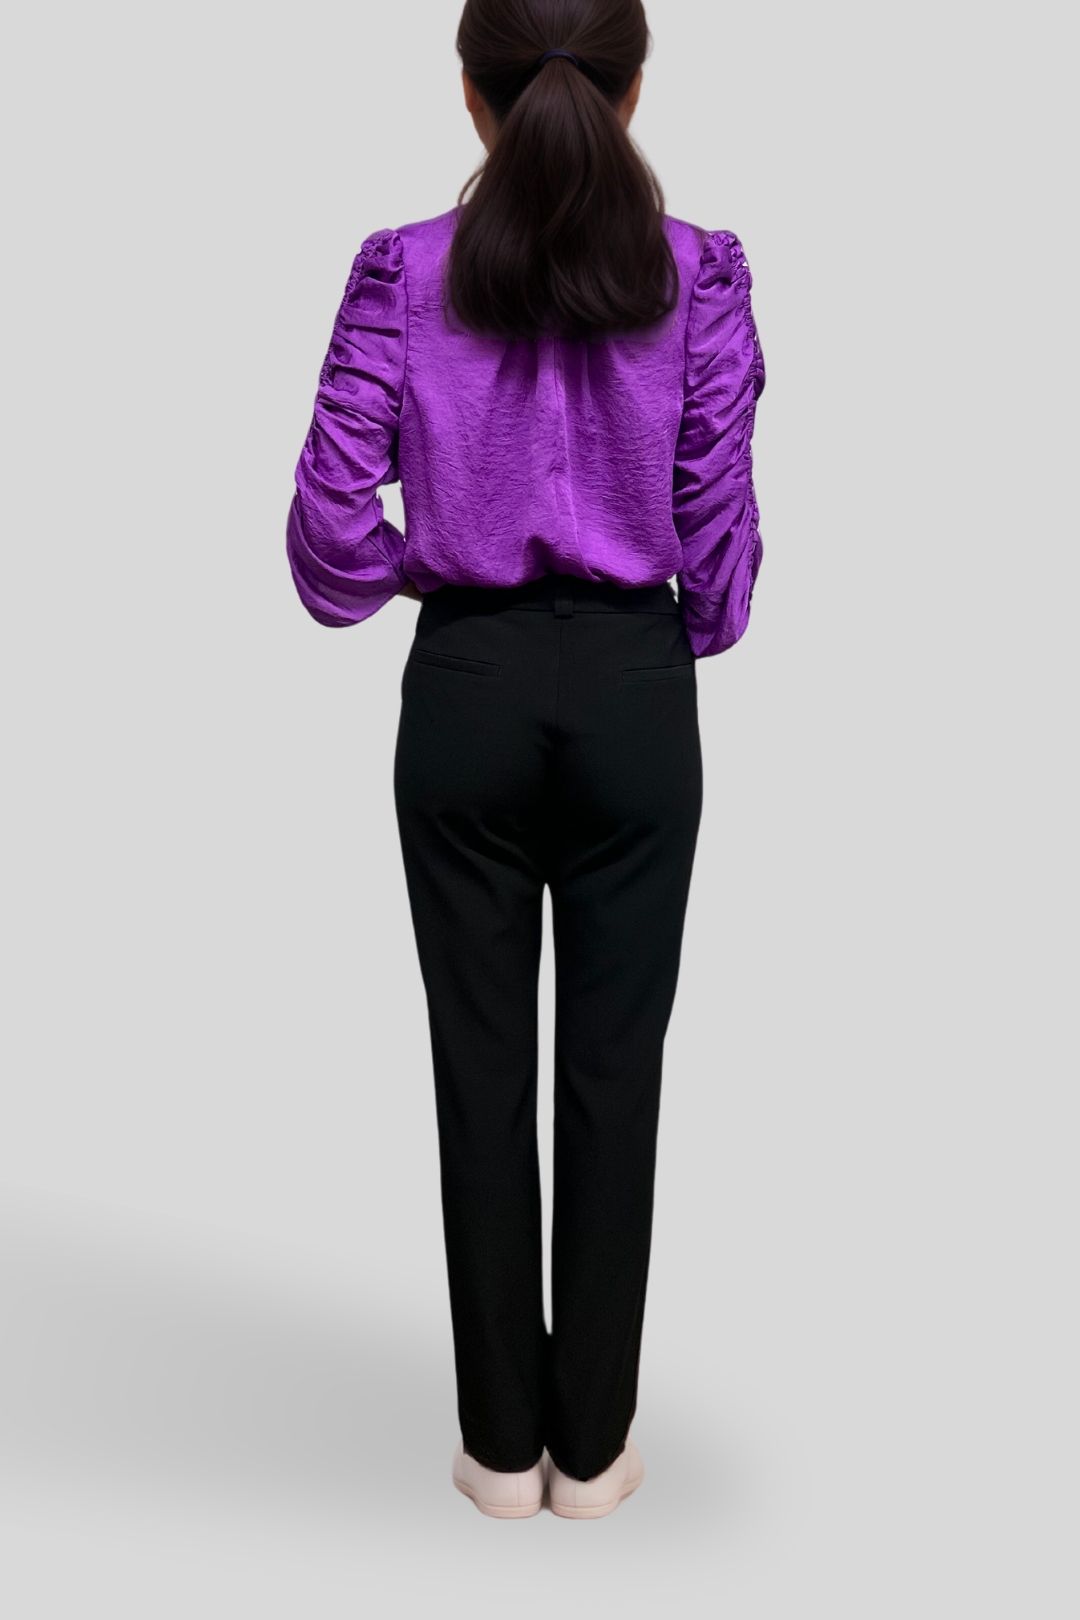 Dress Hire Casual  Marble Satin Ruched Sleeve Top in Ultra Violet